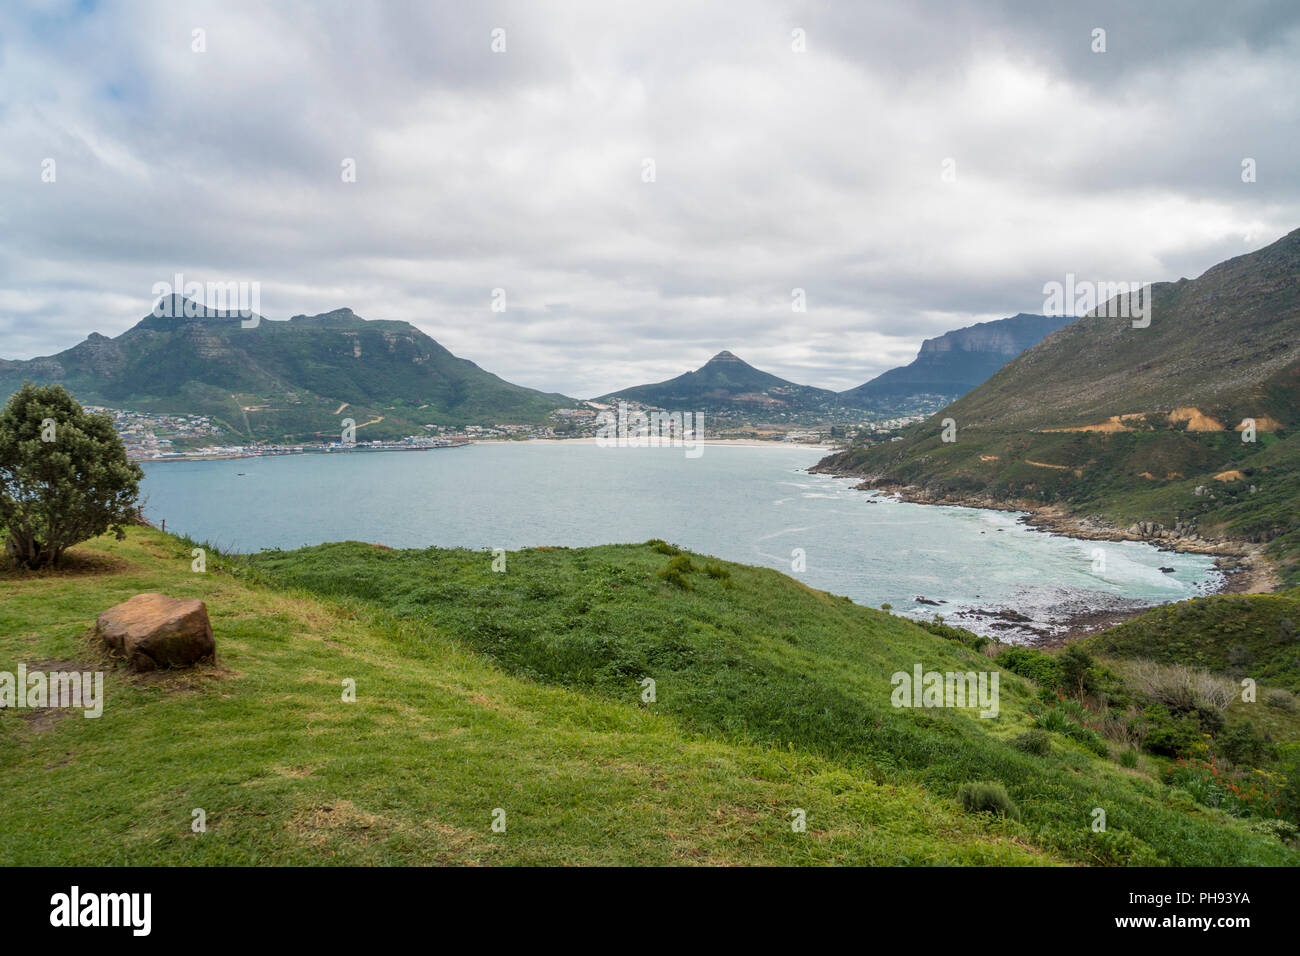 Arial view of Hout Bay, a suburb of Cape Town, South Africa Stock Photo